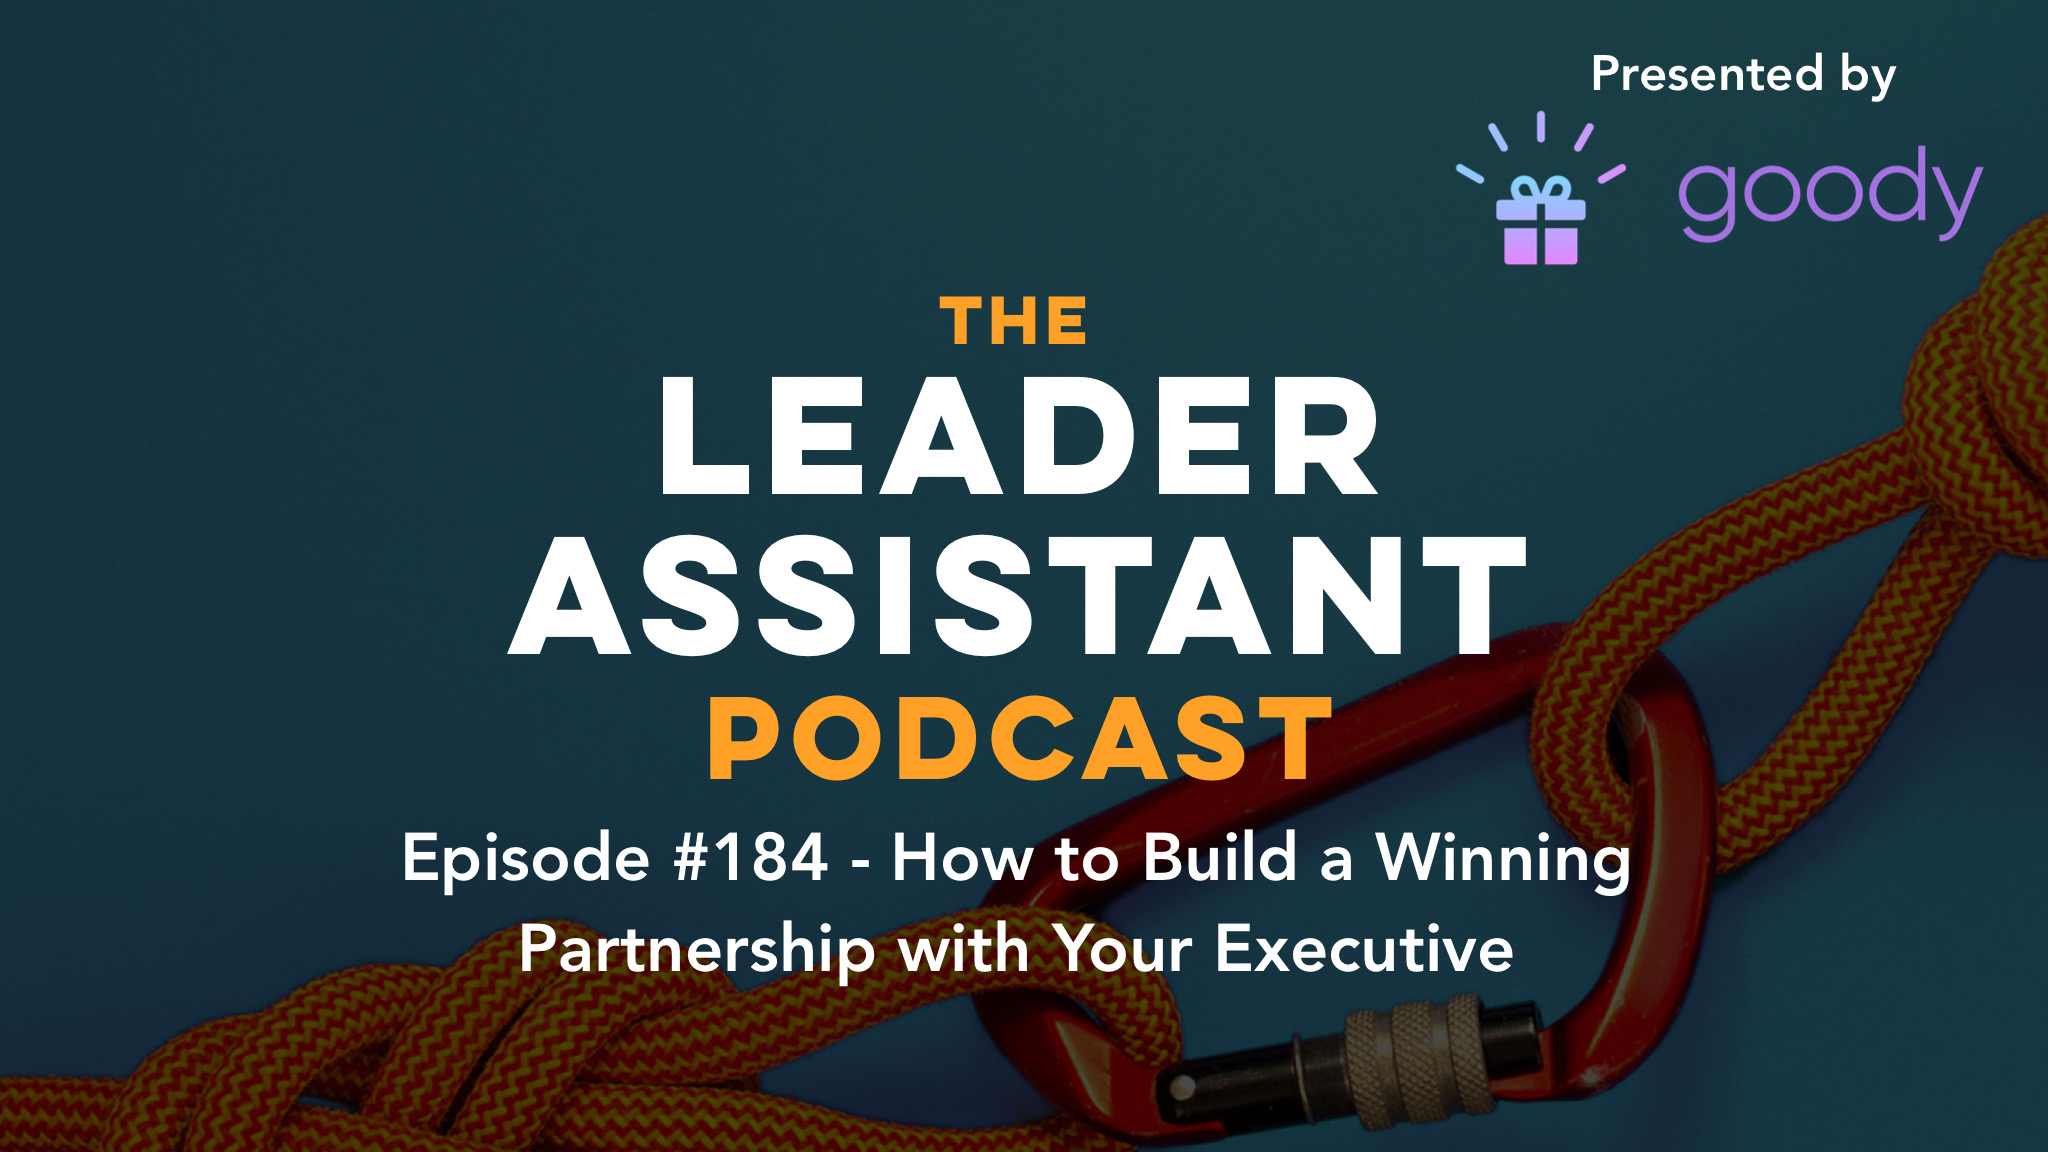 ep 184 leader assistant podcast winning partnership executive